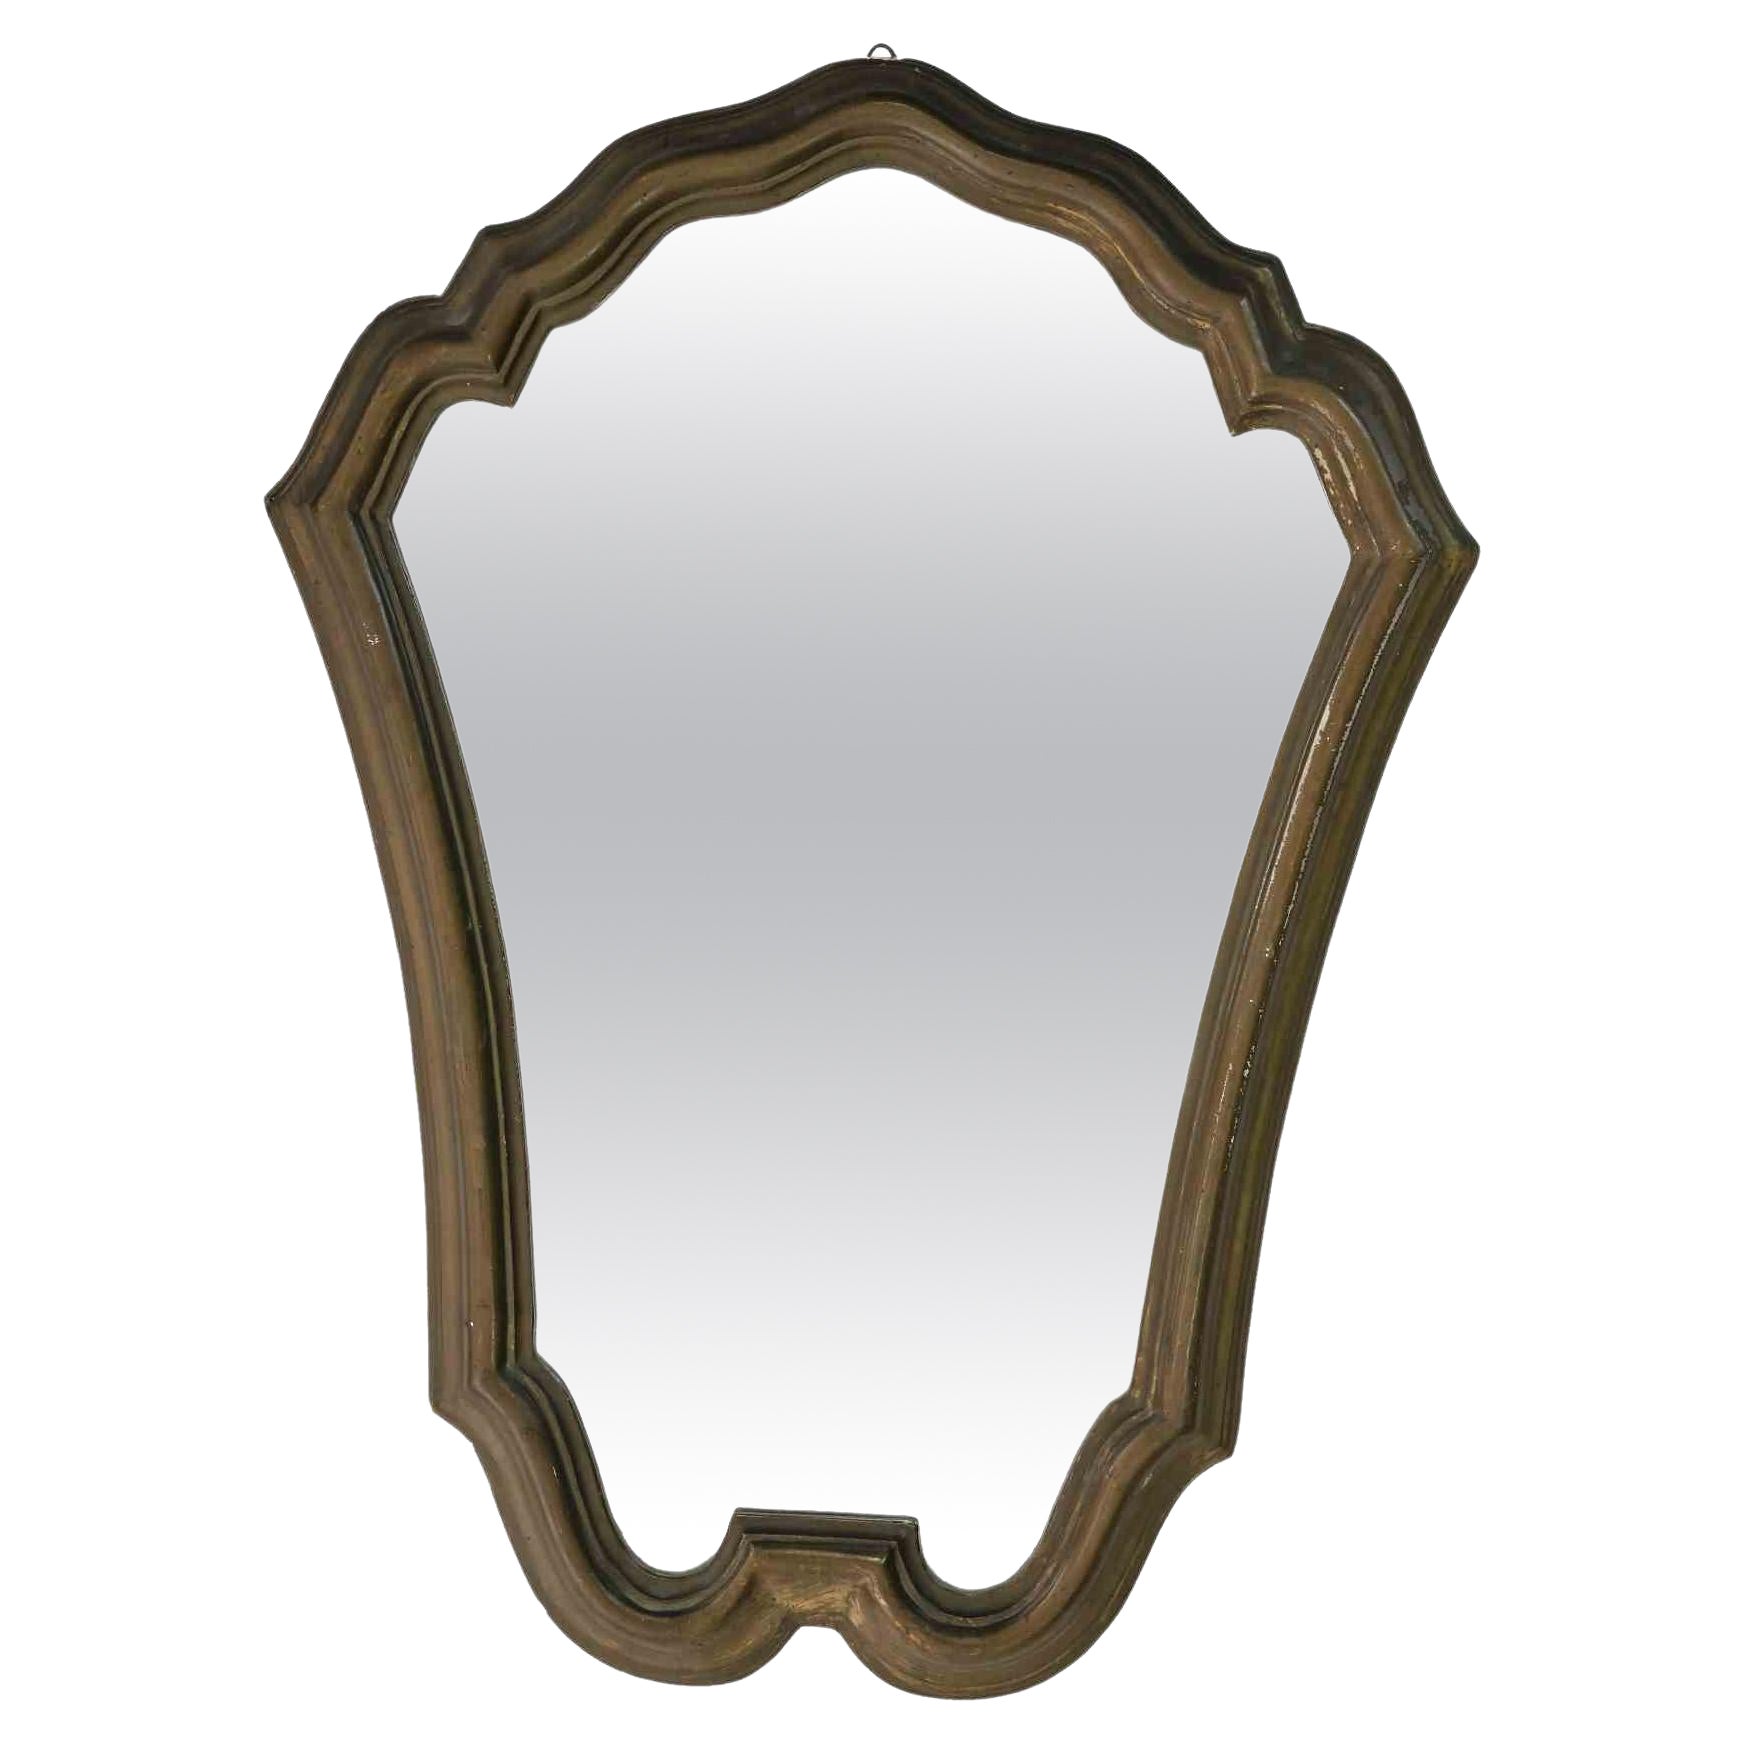 Mirrors at Auction